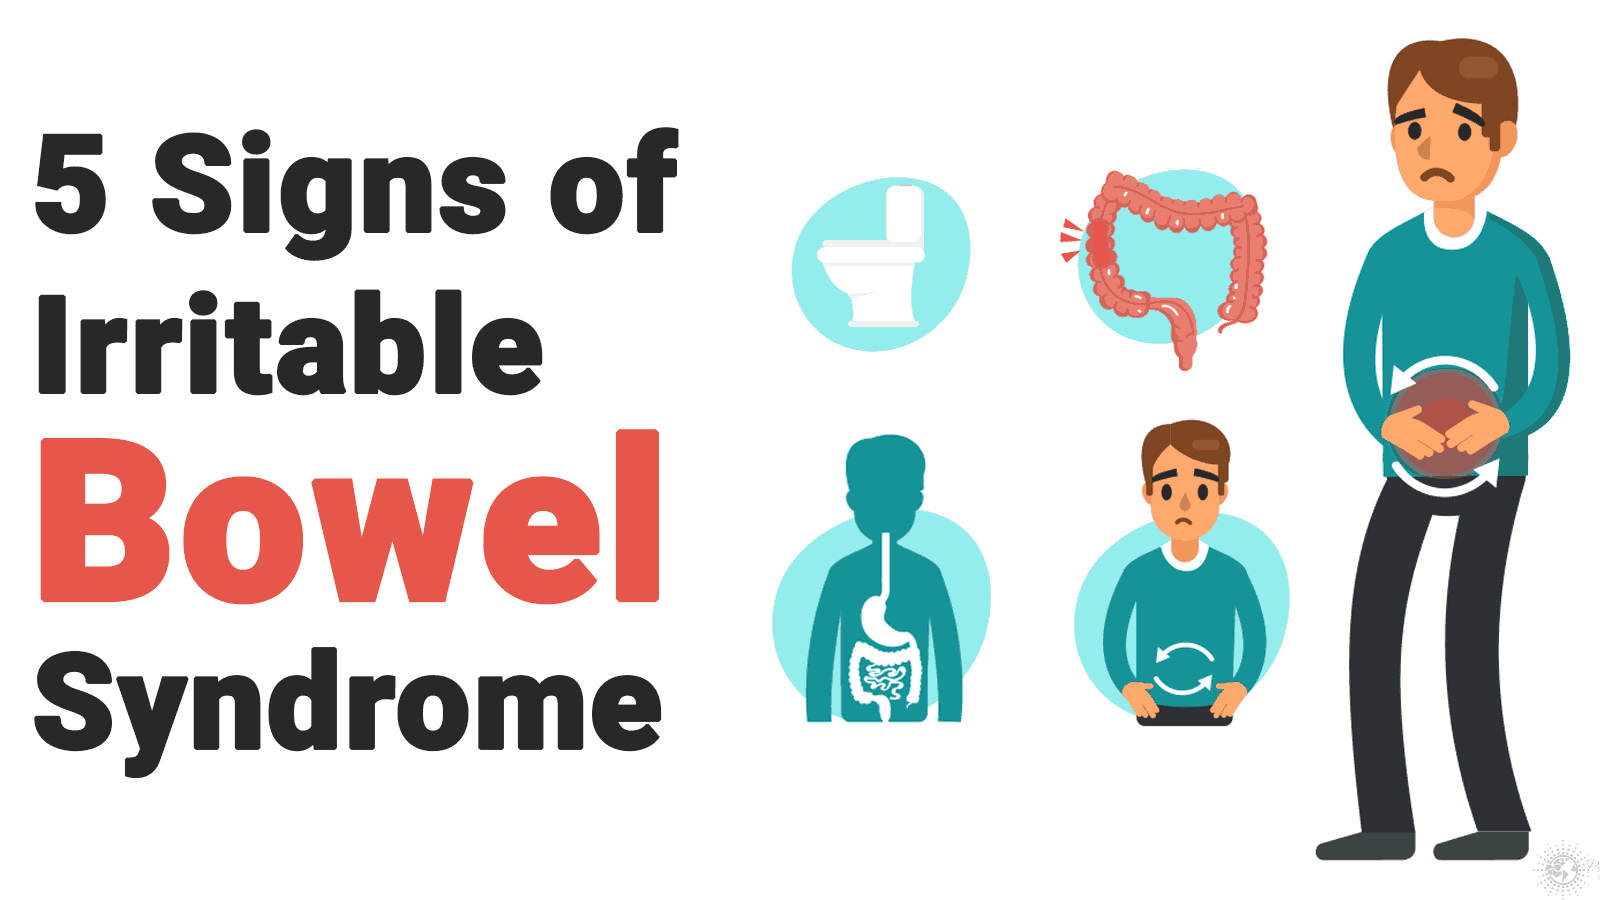 5 Most Commons Signs of Irritable Bowel Syndrome